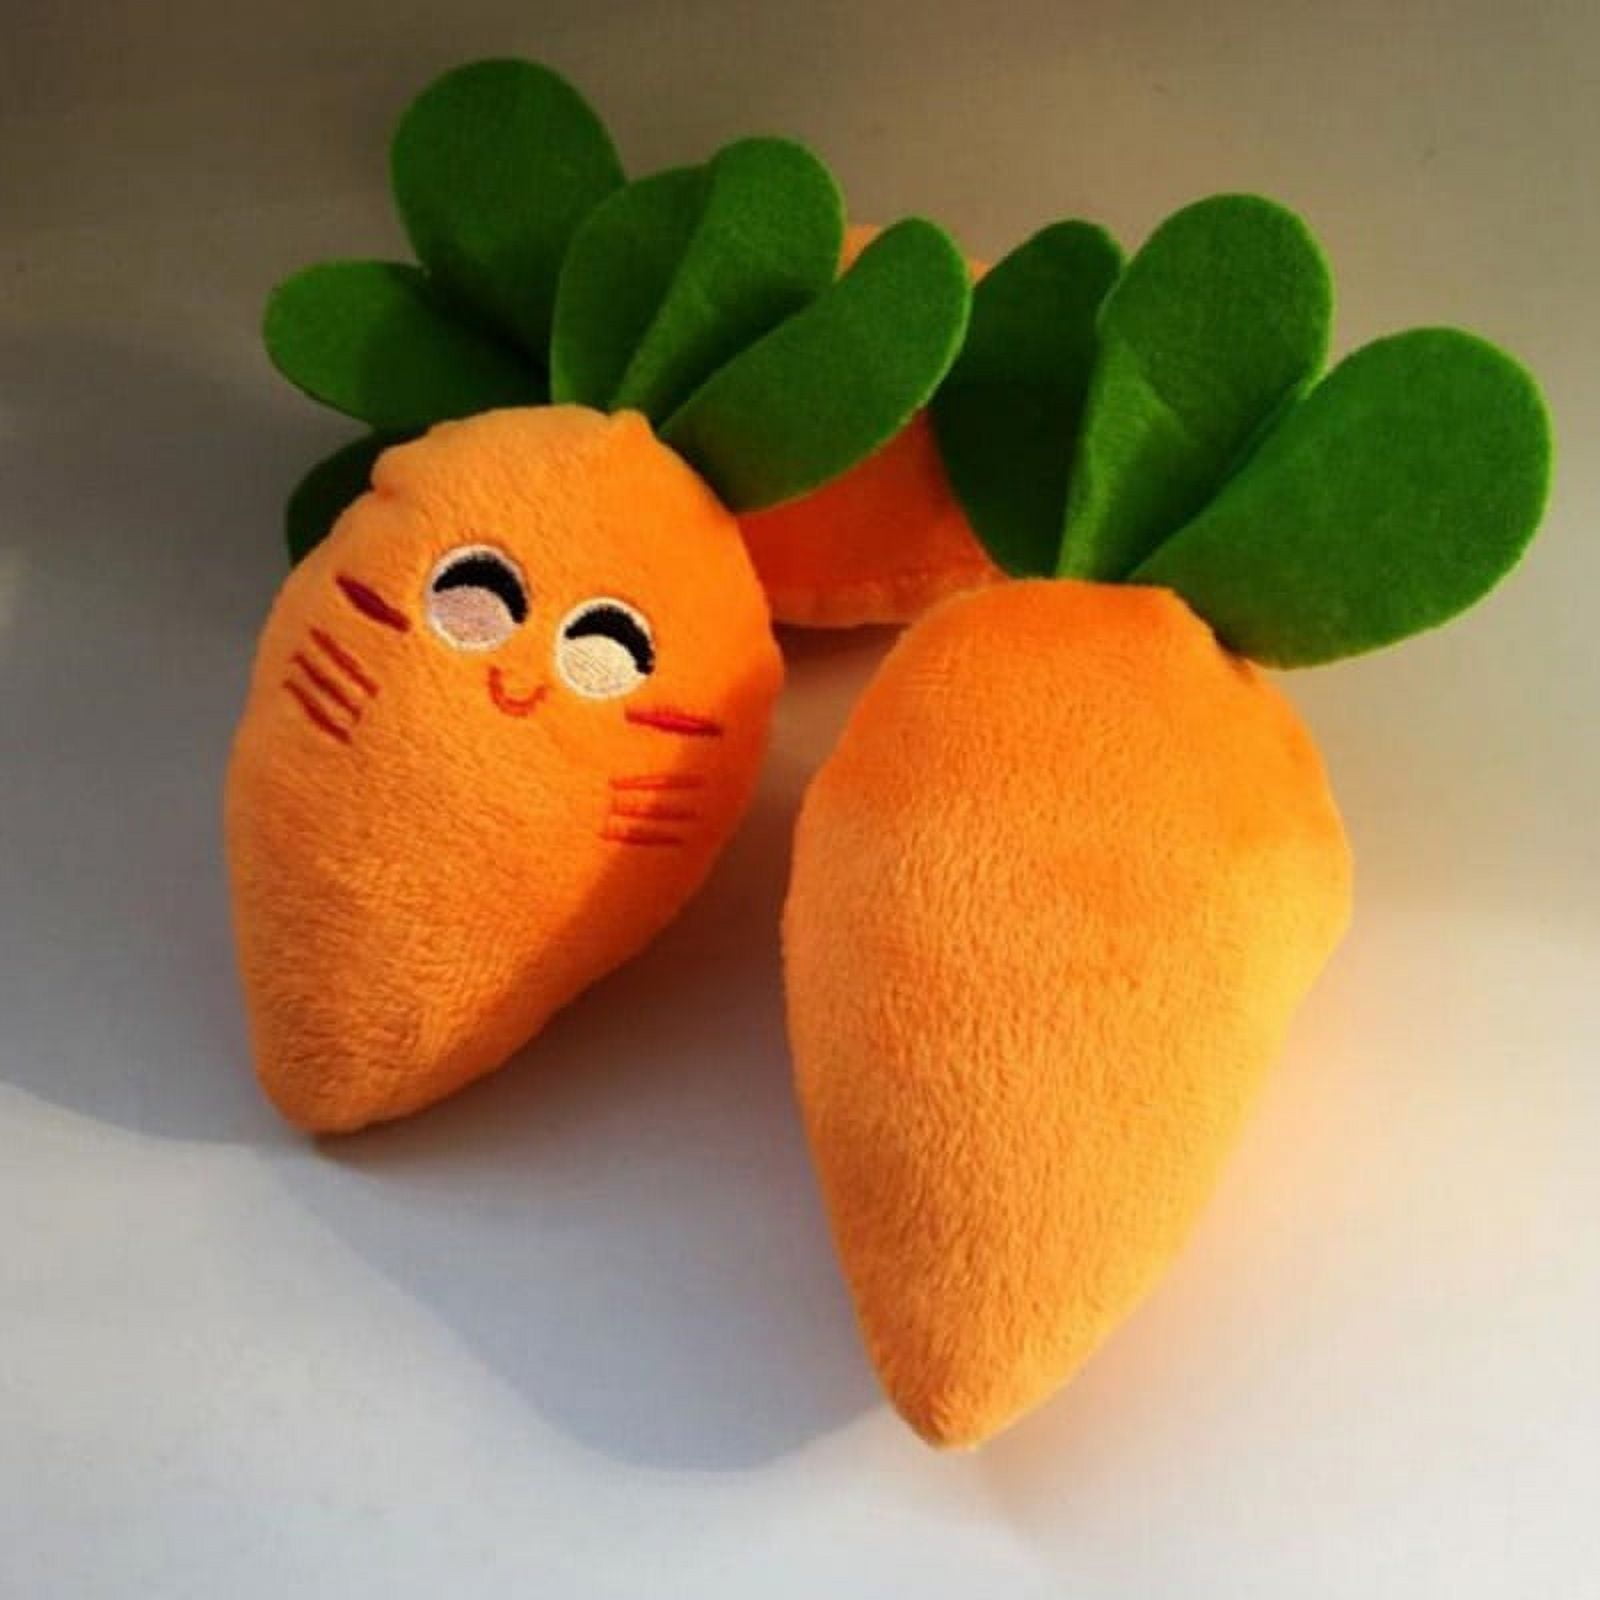 Dog Carrot Plush Toy Interactive Squeaky Crinkle Hide And Pull – Ollypet